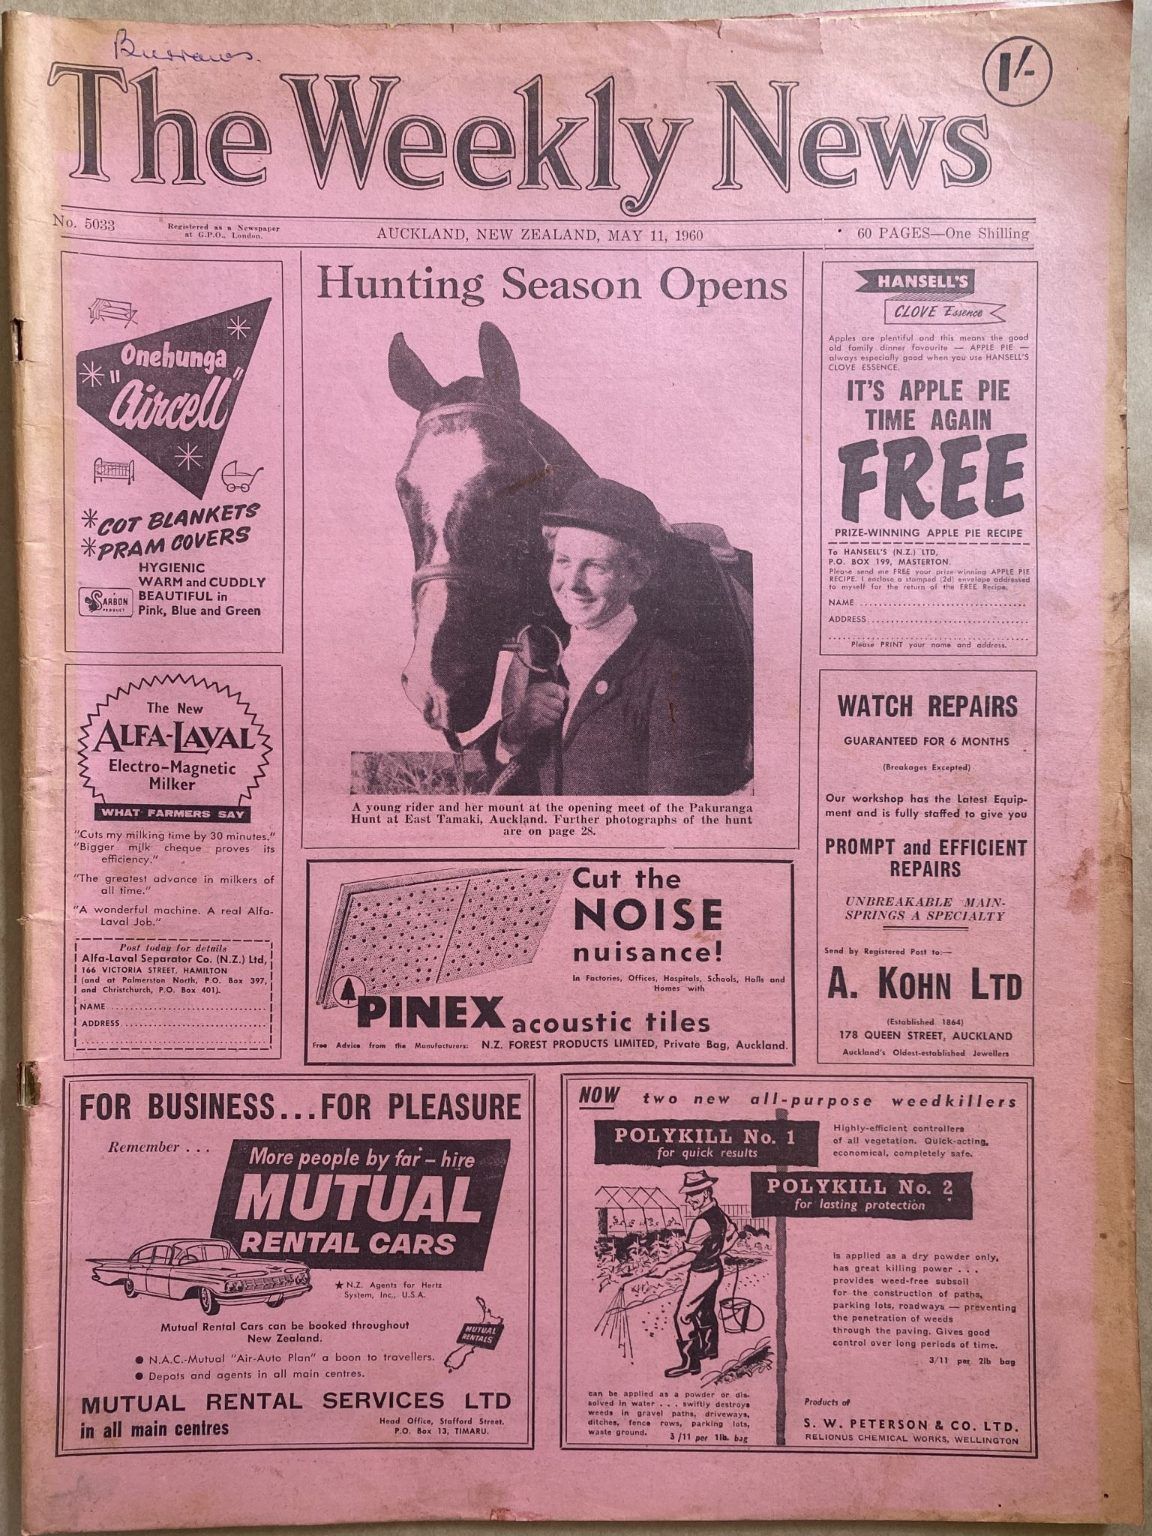 OLD NEWSPAPER: The Weekly News, No. 5033, 11 May 1960